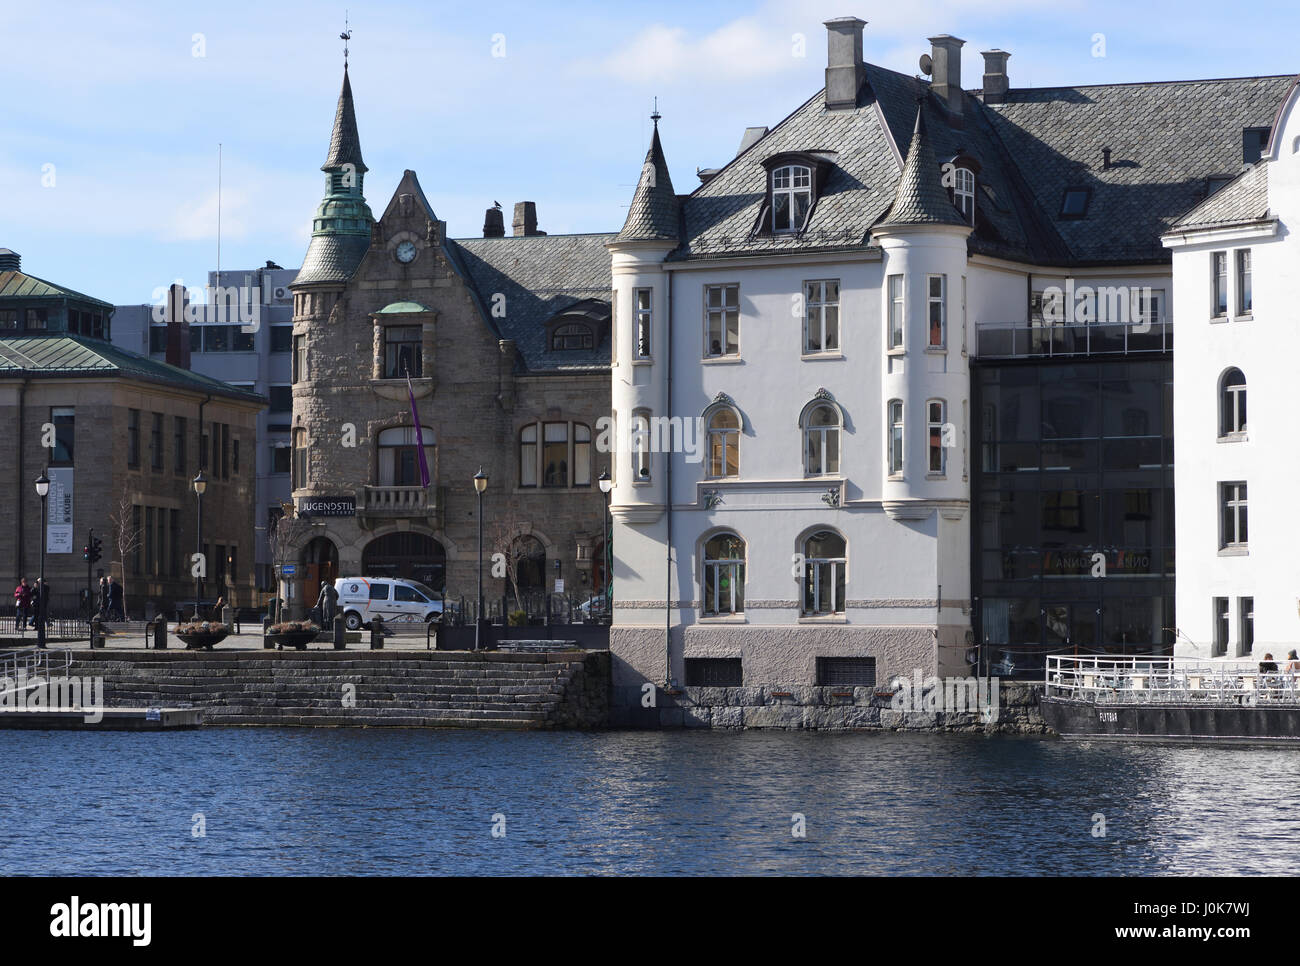 The art nouveau buildings on the waterfront of the harbour at  Alesund. Ålesund, Møre og Romsdal, Norway. Stock Photo